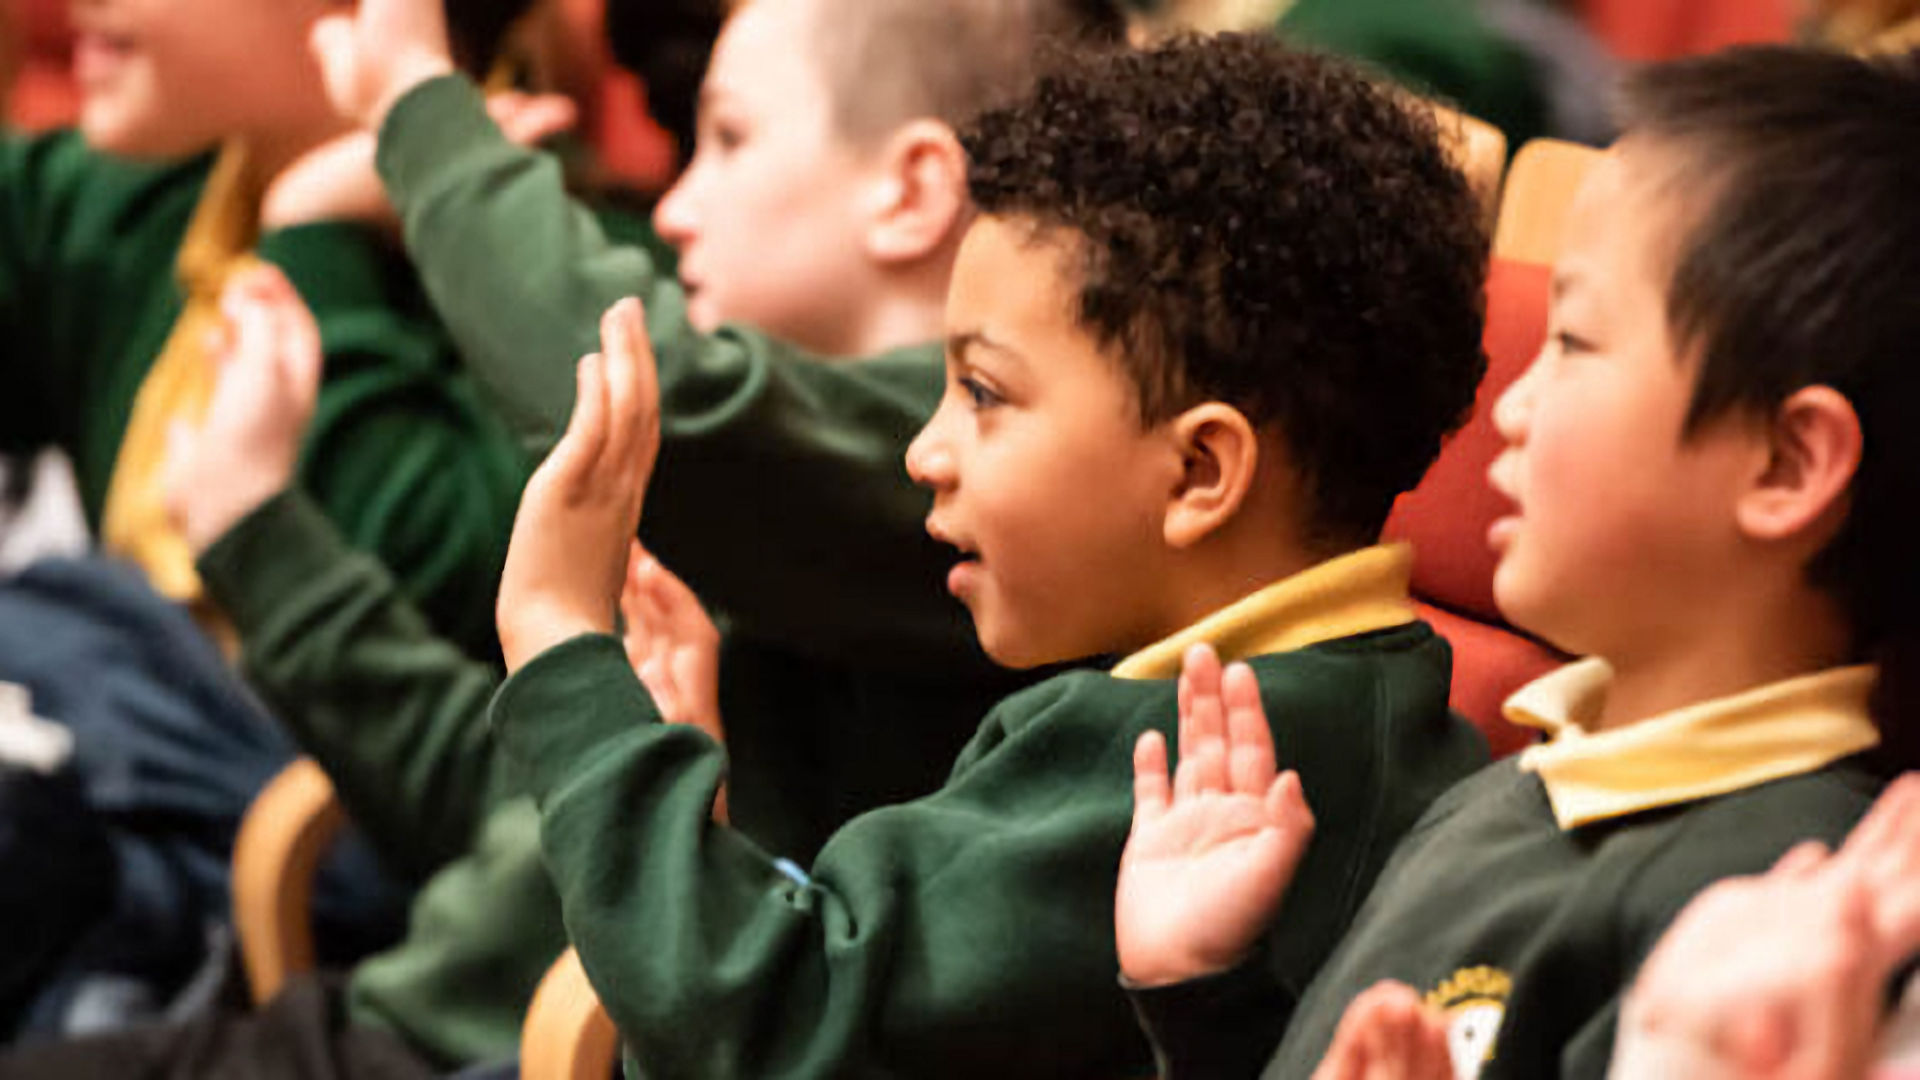 Chetham's Schools Concerts - Revolting Rhymes